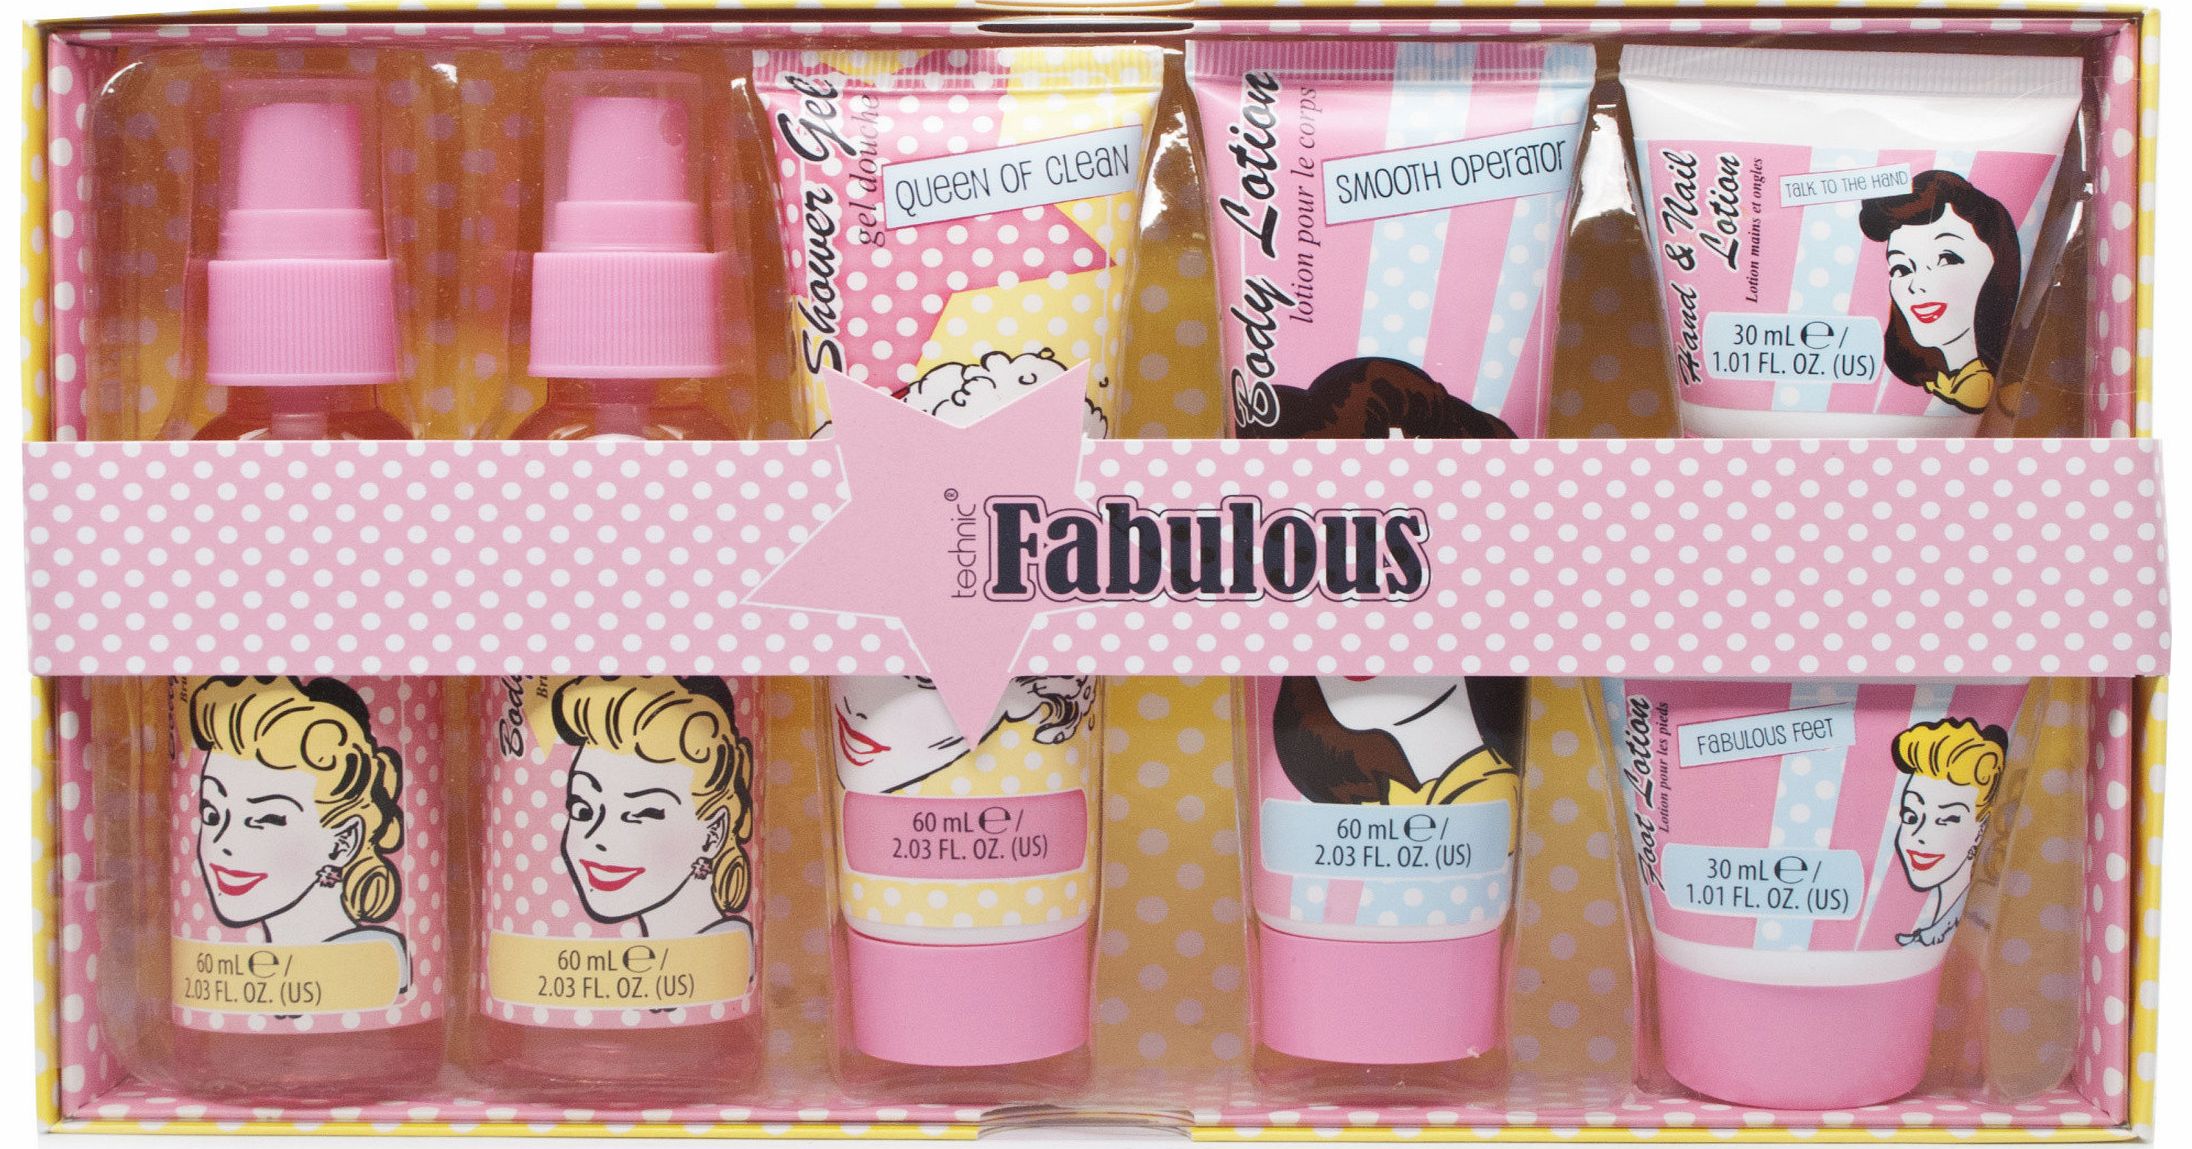 Technic Fabulous Queen of Clean Five Piece Set: Bathe your way to beauty with these 5 piece set of gorgeous body products. The luxurious fragrances and retro packaging make this set the perfect gift for any beauty queen! Set includes: 2x Body Mist sp